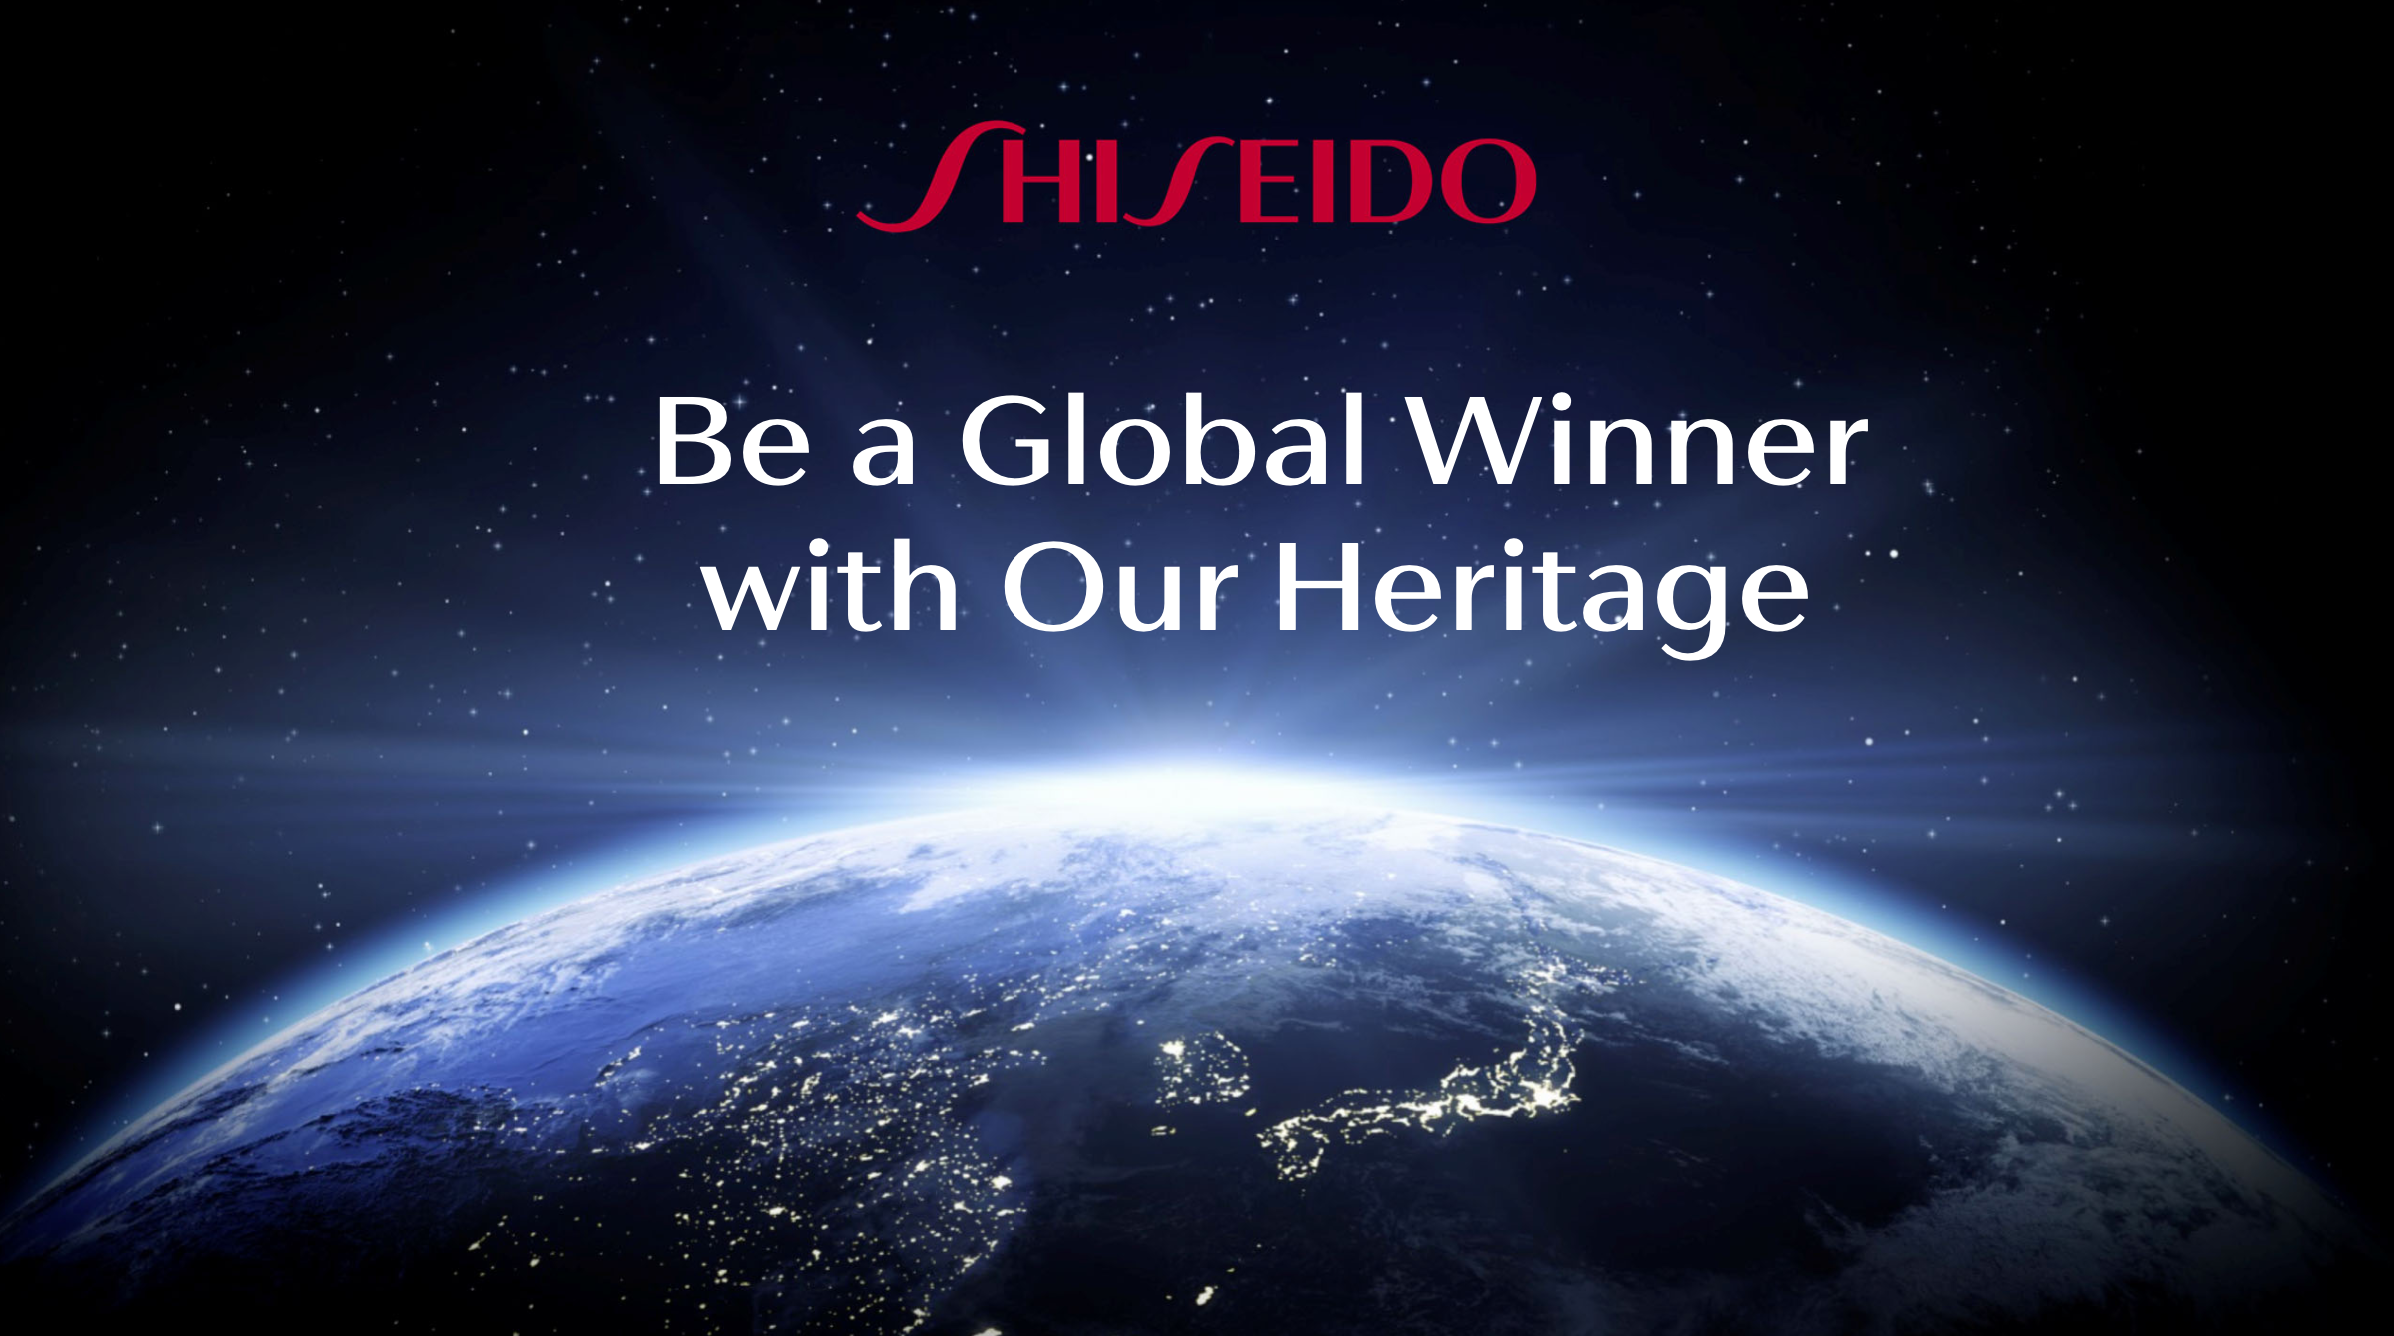 Shiseido’s H1 Net Sales Reach ¥ 494.2 Billion, Strong Growth for SHISEIDO and Clé de Peau in Mainland China